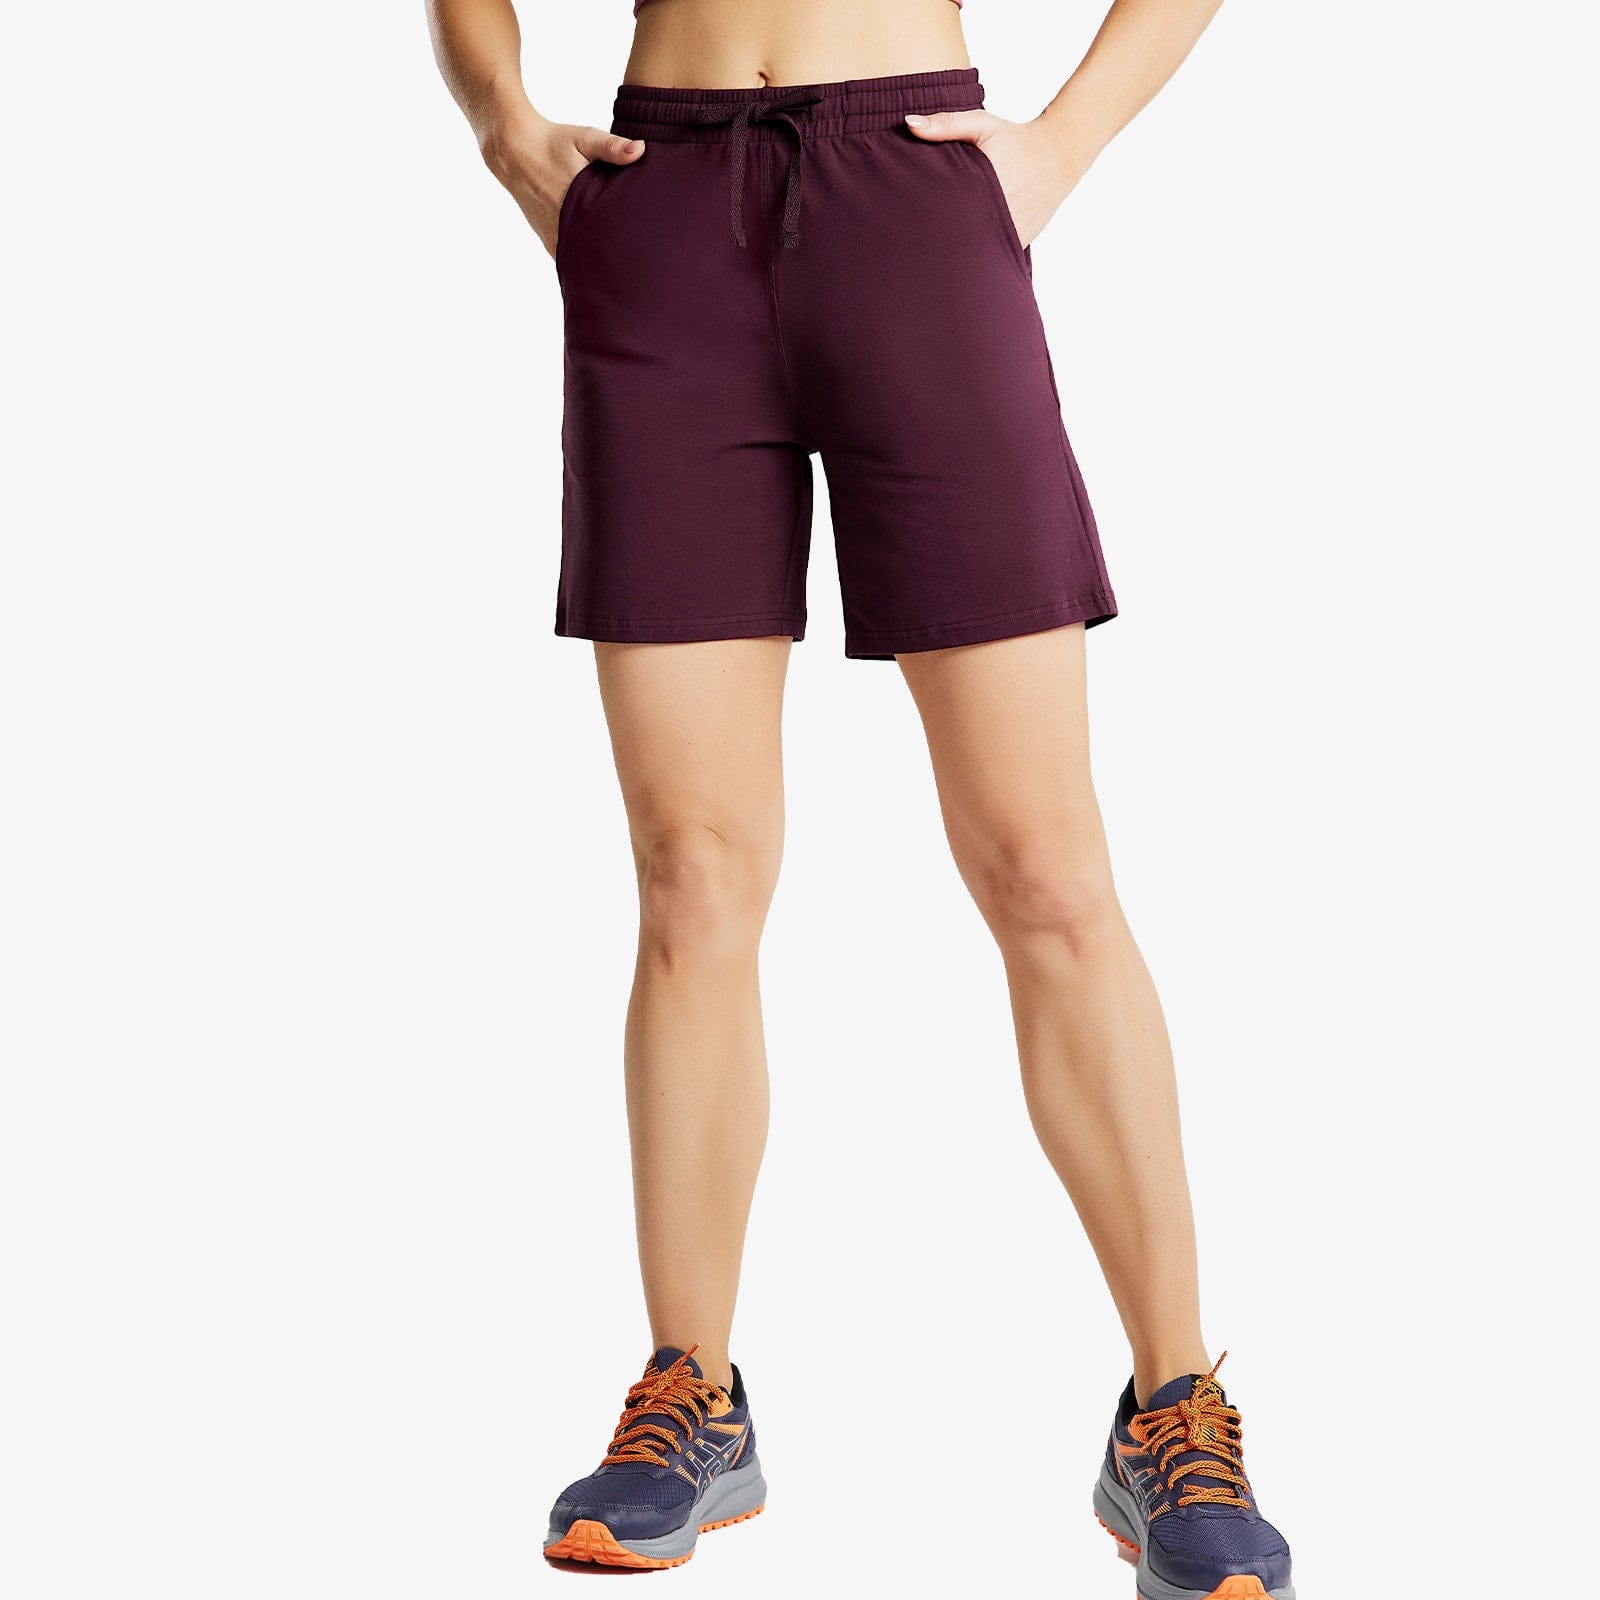 Women's Bermuda Cotton Shorts with Pockets Lightweight & Stretch Women Shorts Wine Red / S MIER